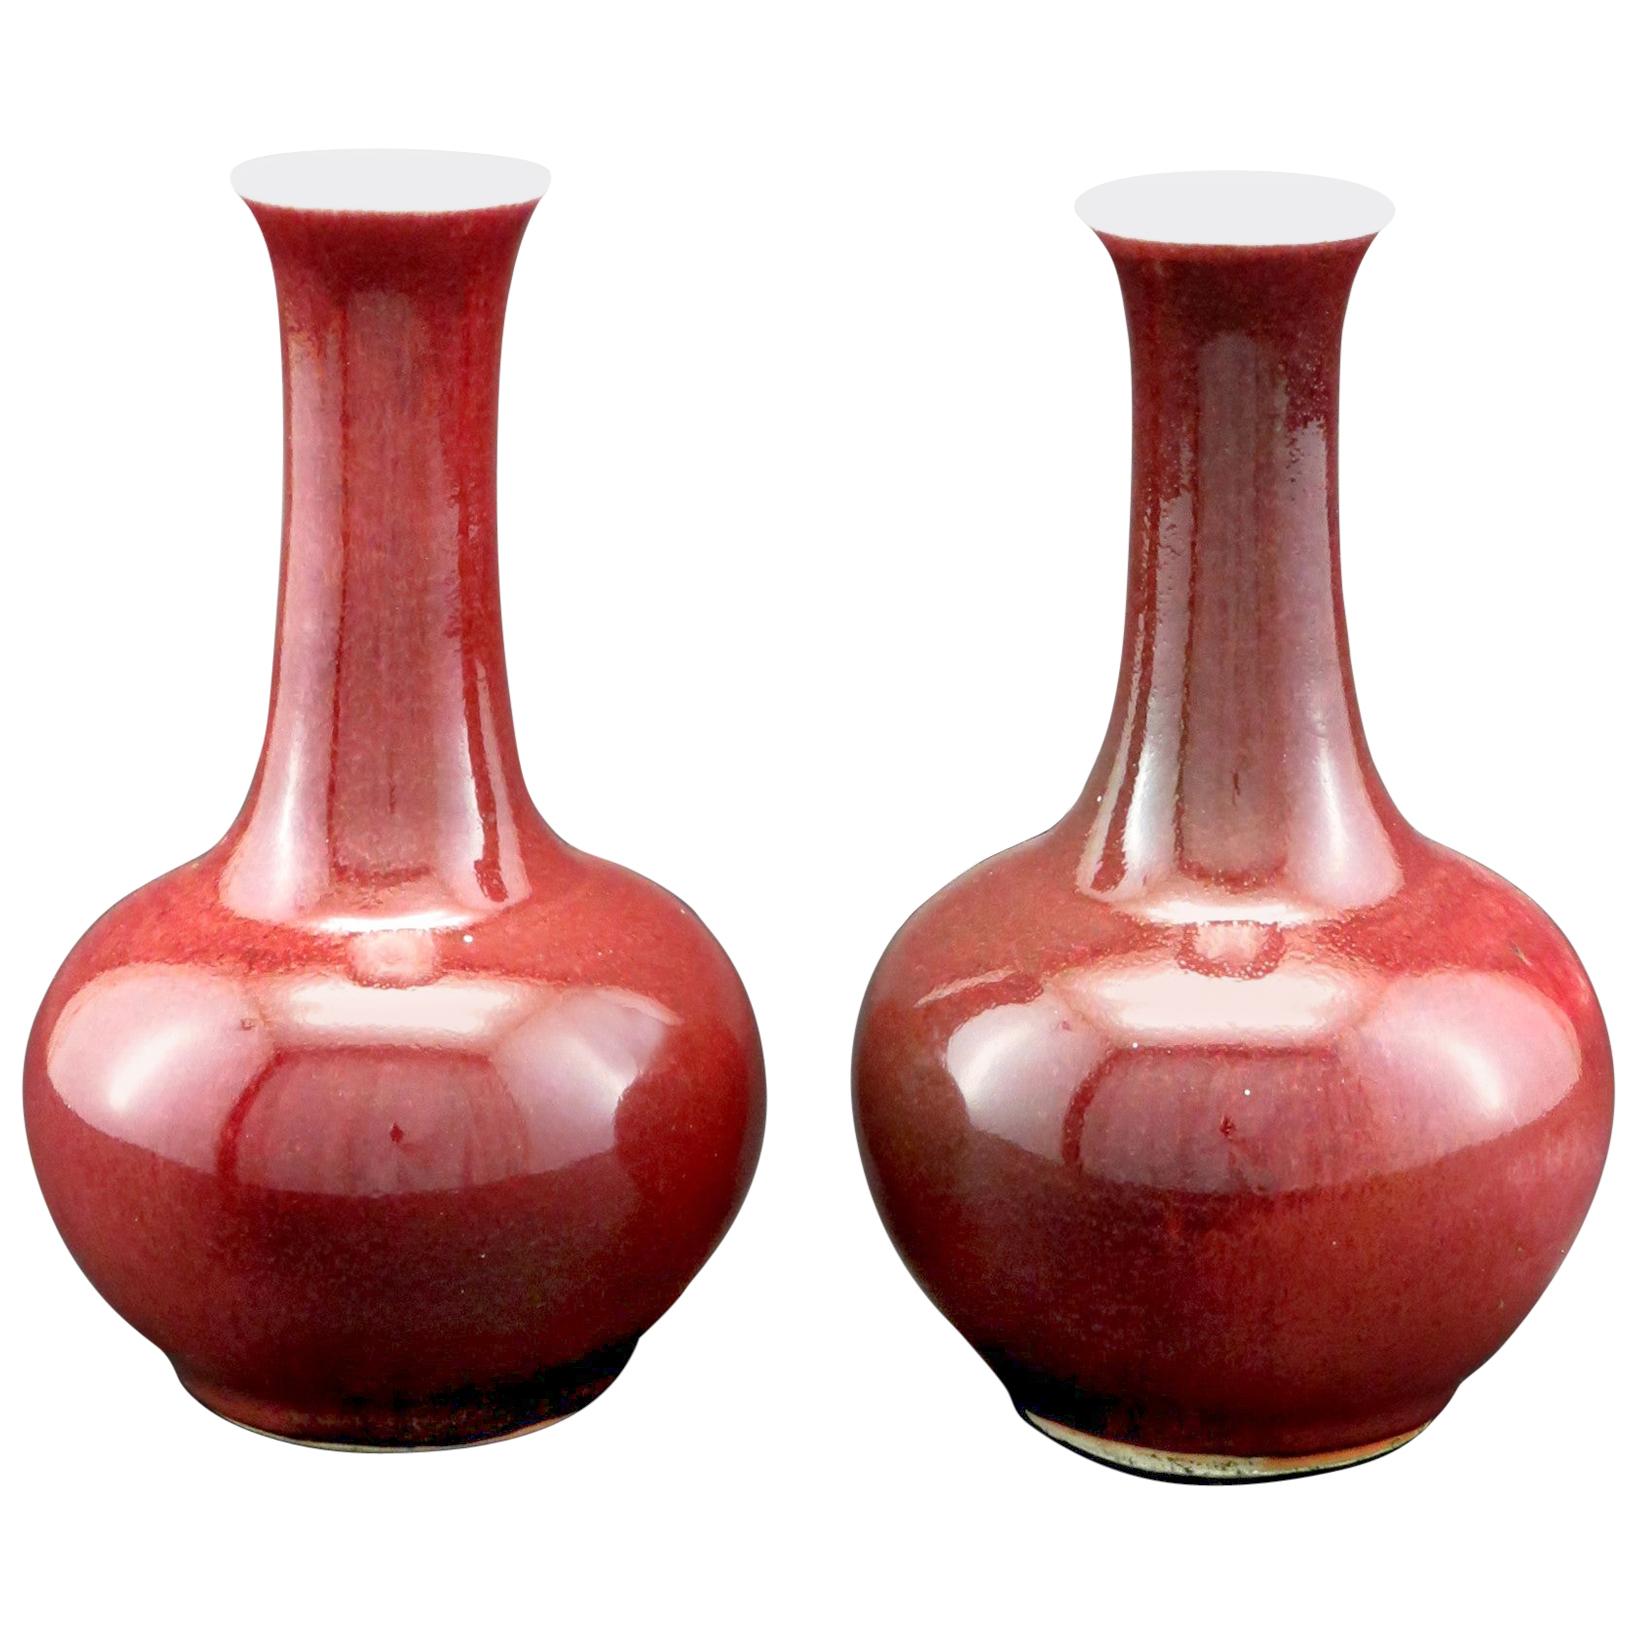 Pair of Late Qing Period Sang de Boeuf Porcelain Bottle Vases, China, circa 1900